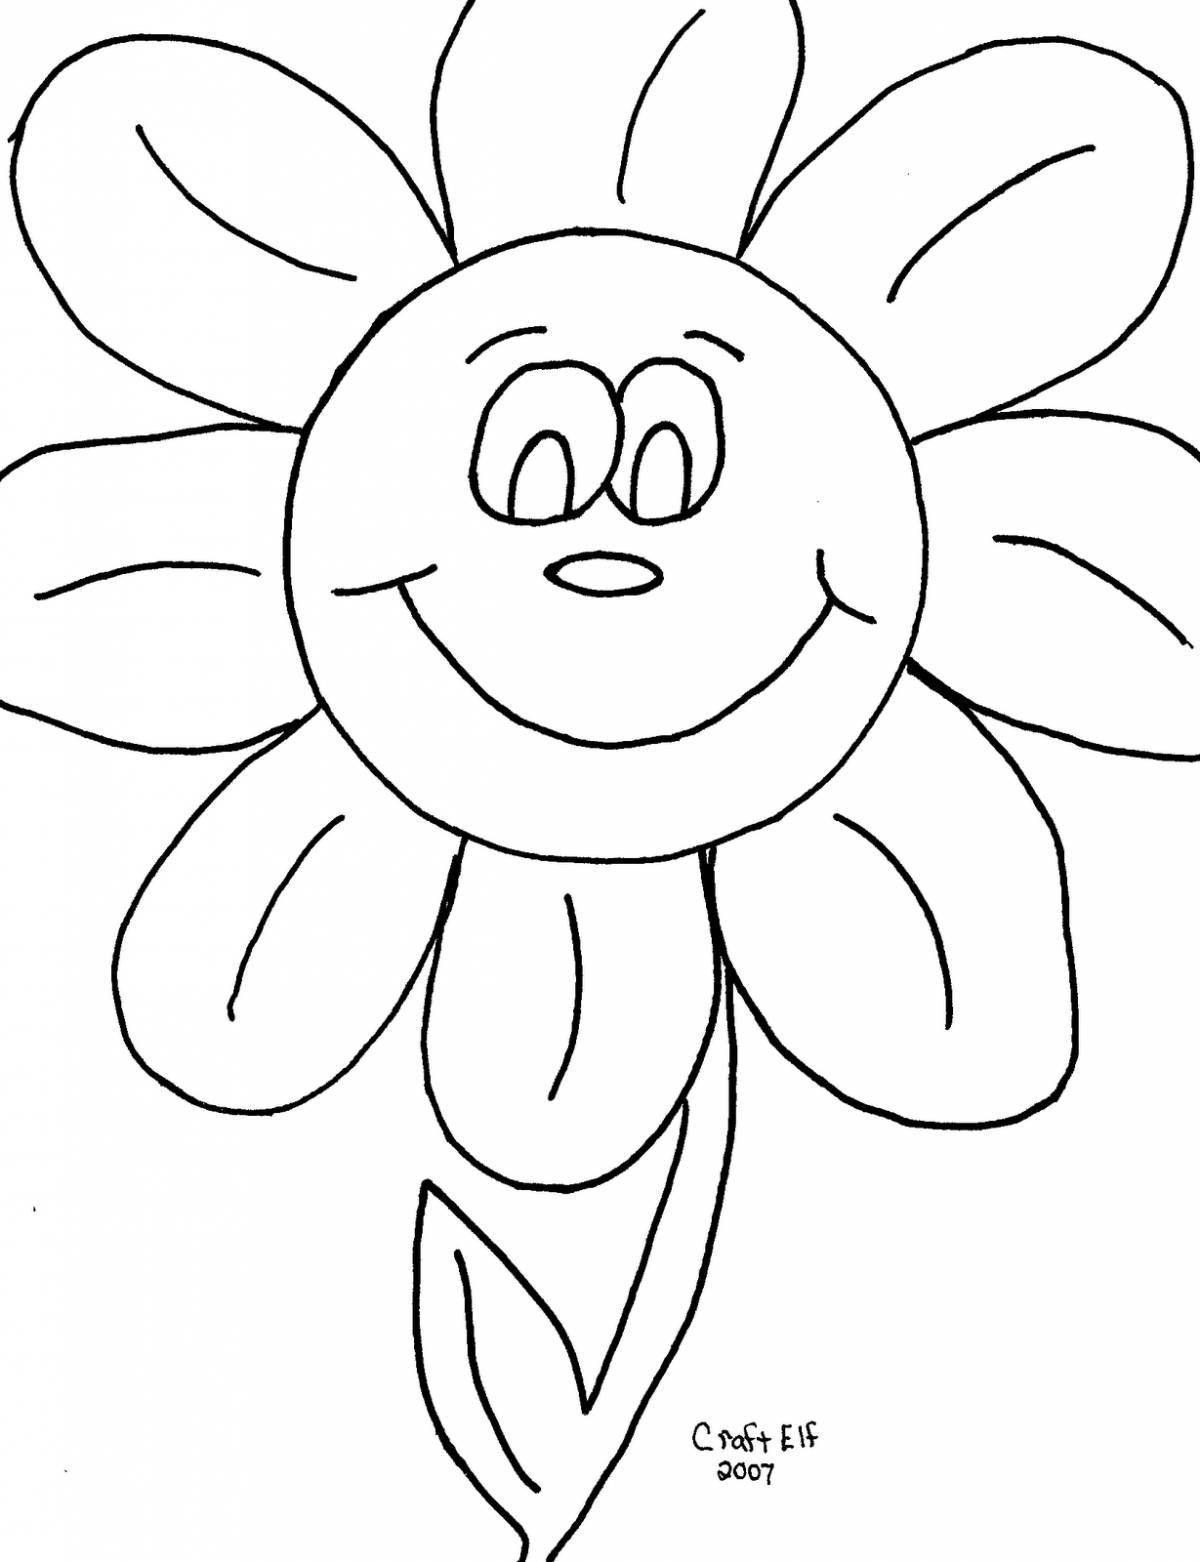 Radiant coloring page flower seven-flower template